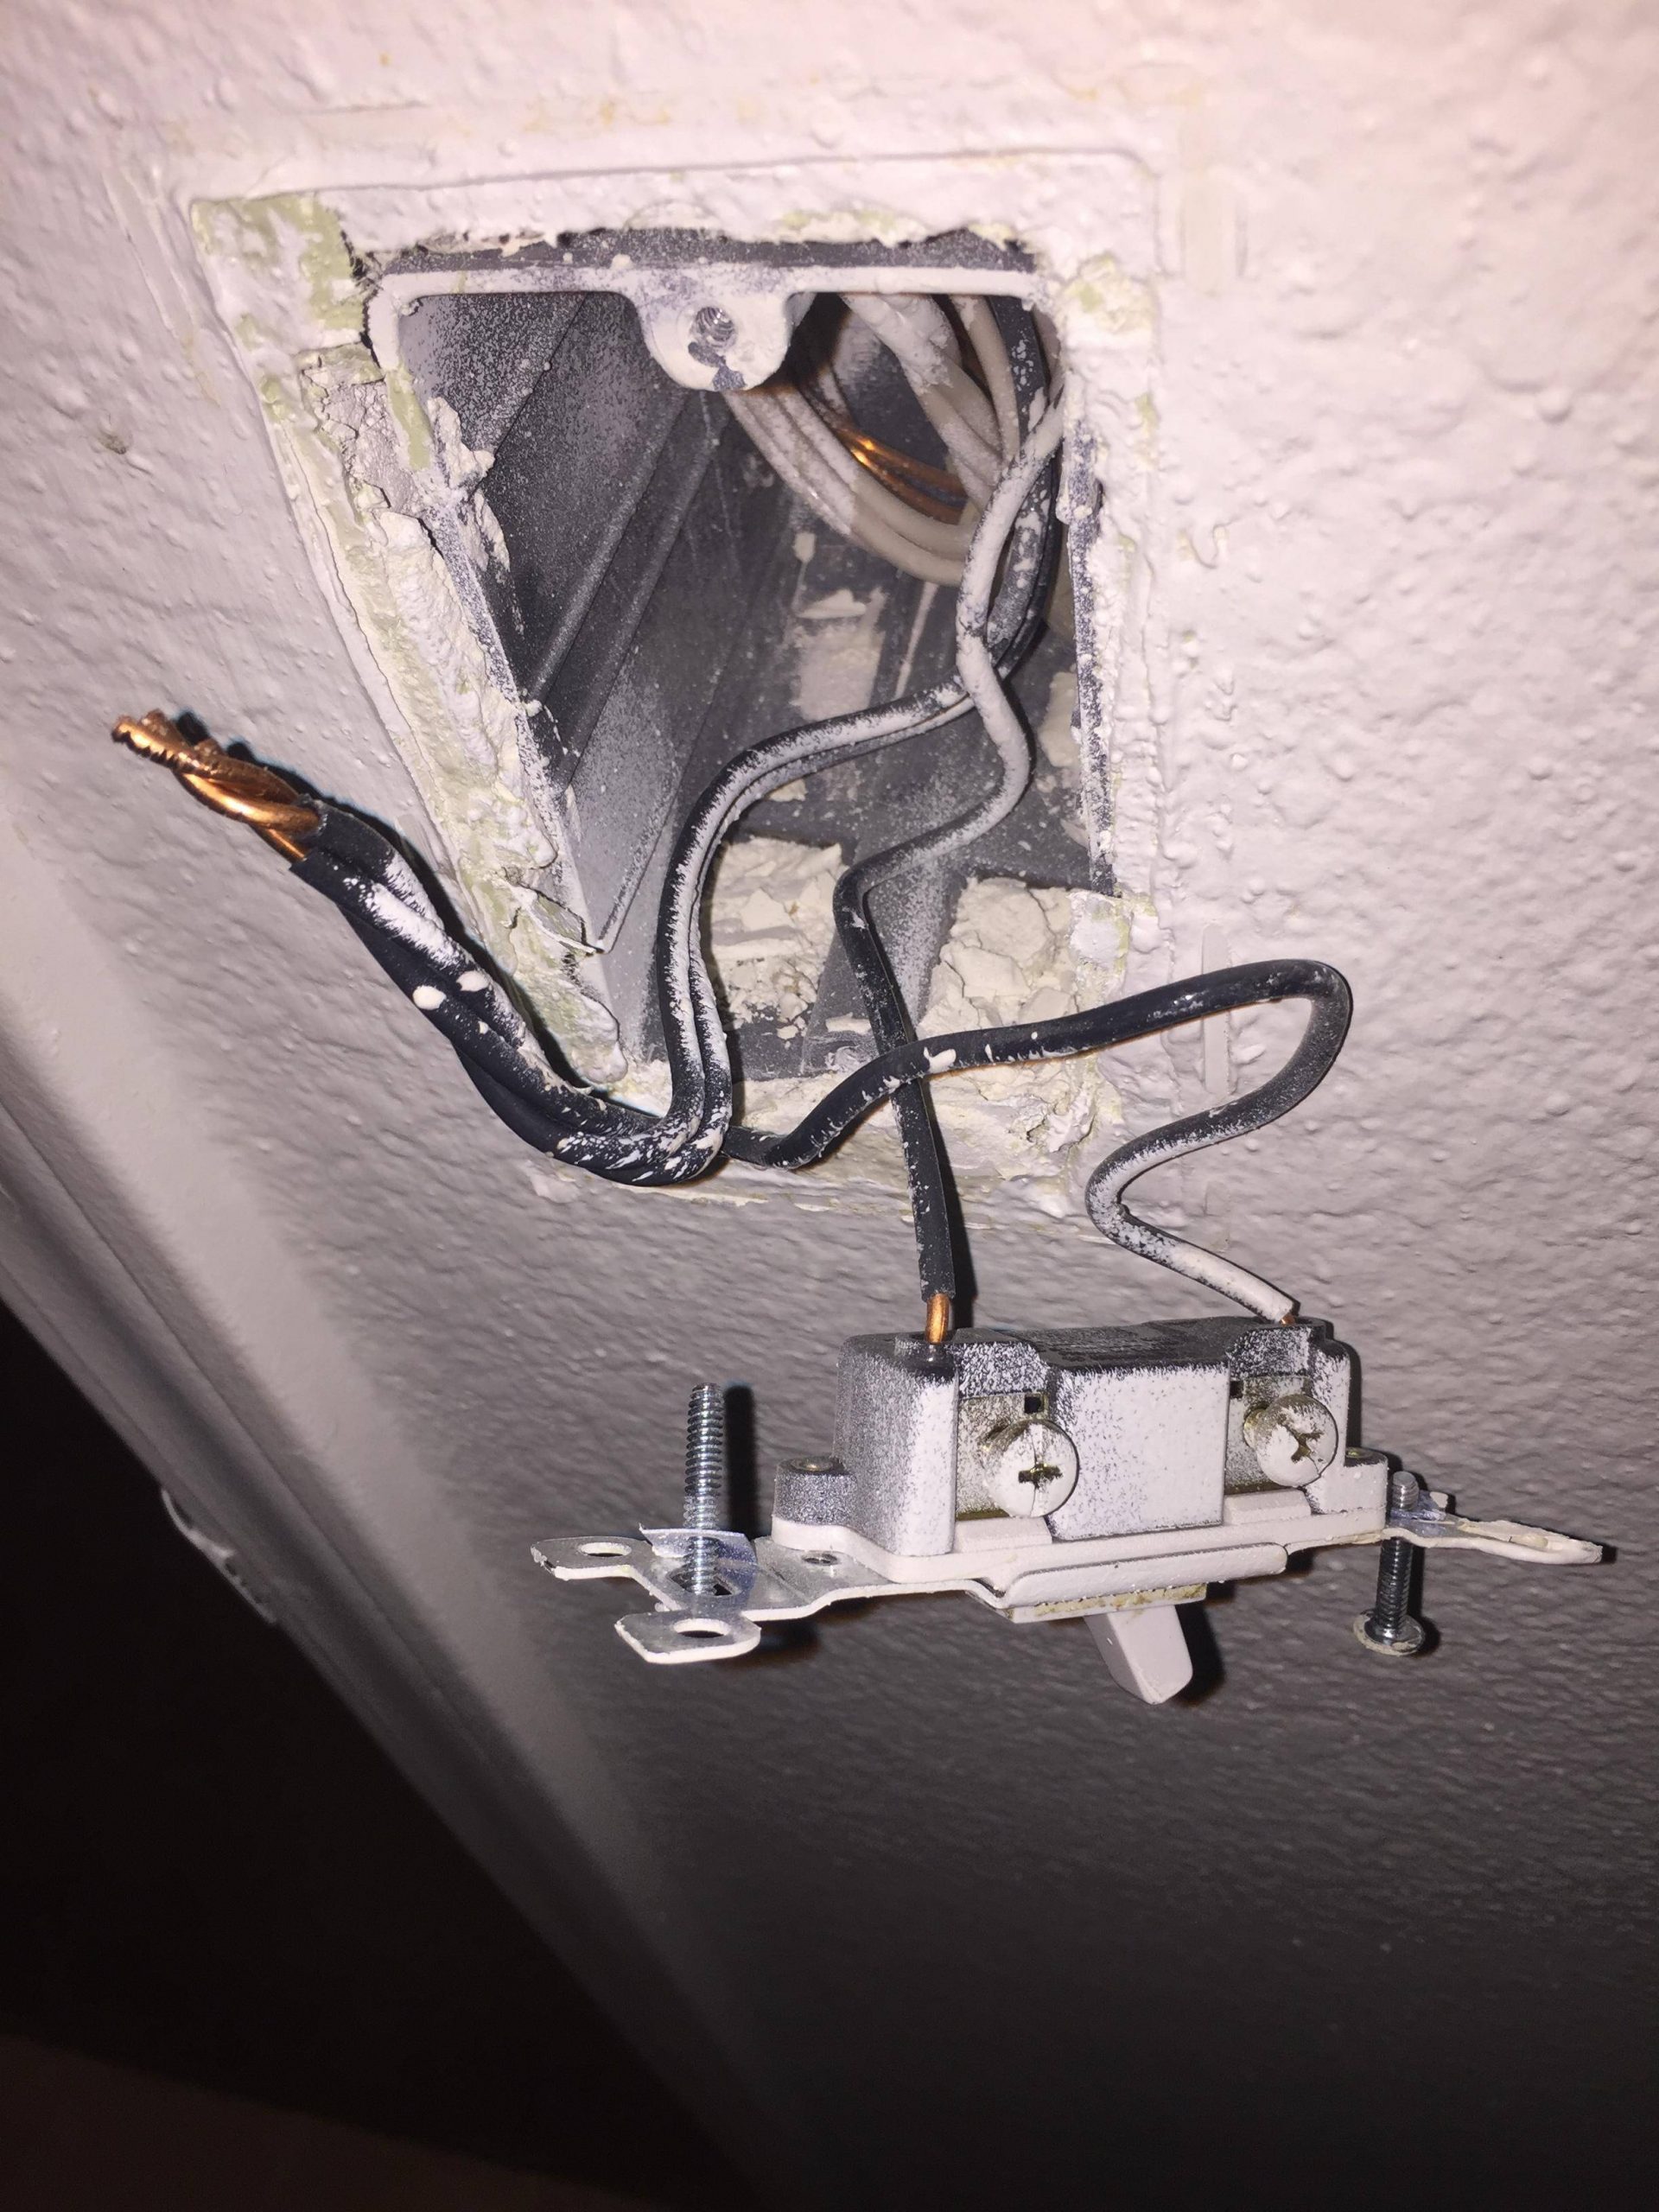 Replacement Wiring Fan And Light For Bathroom Twenty Two with proportions 2448 X 3264